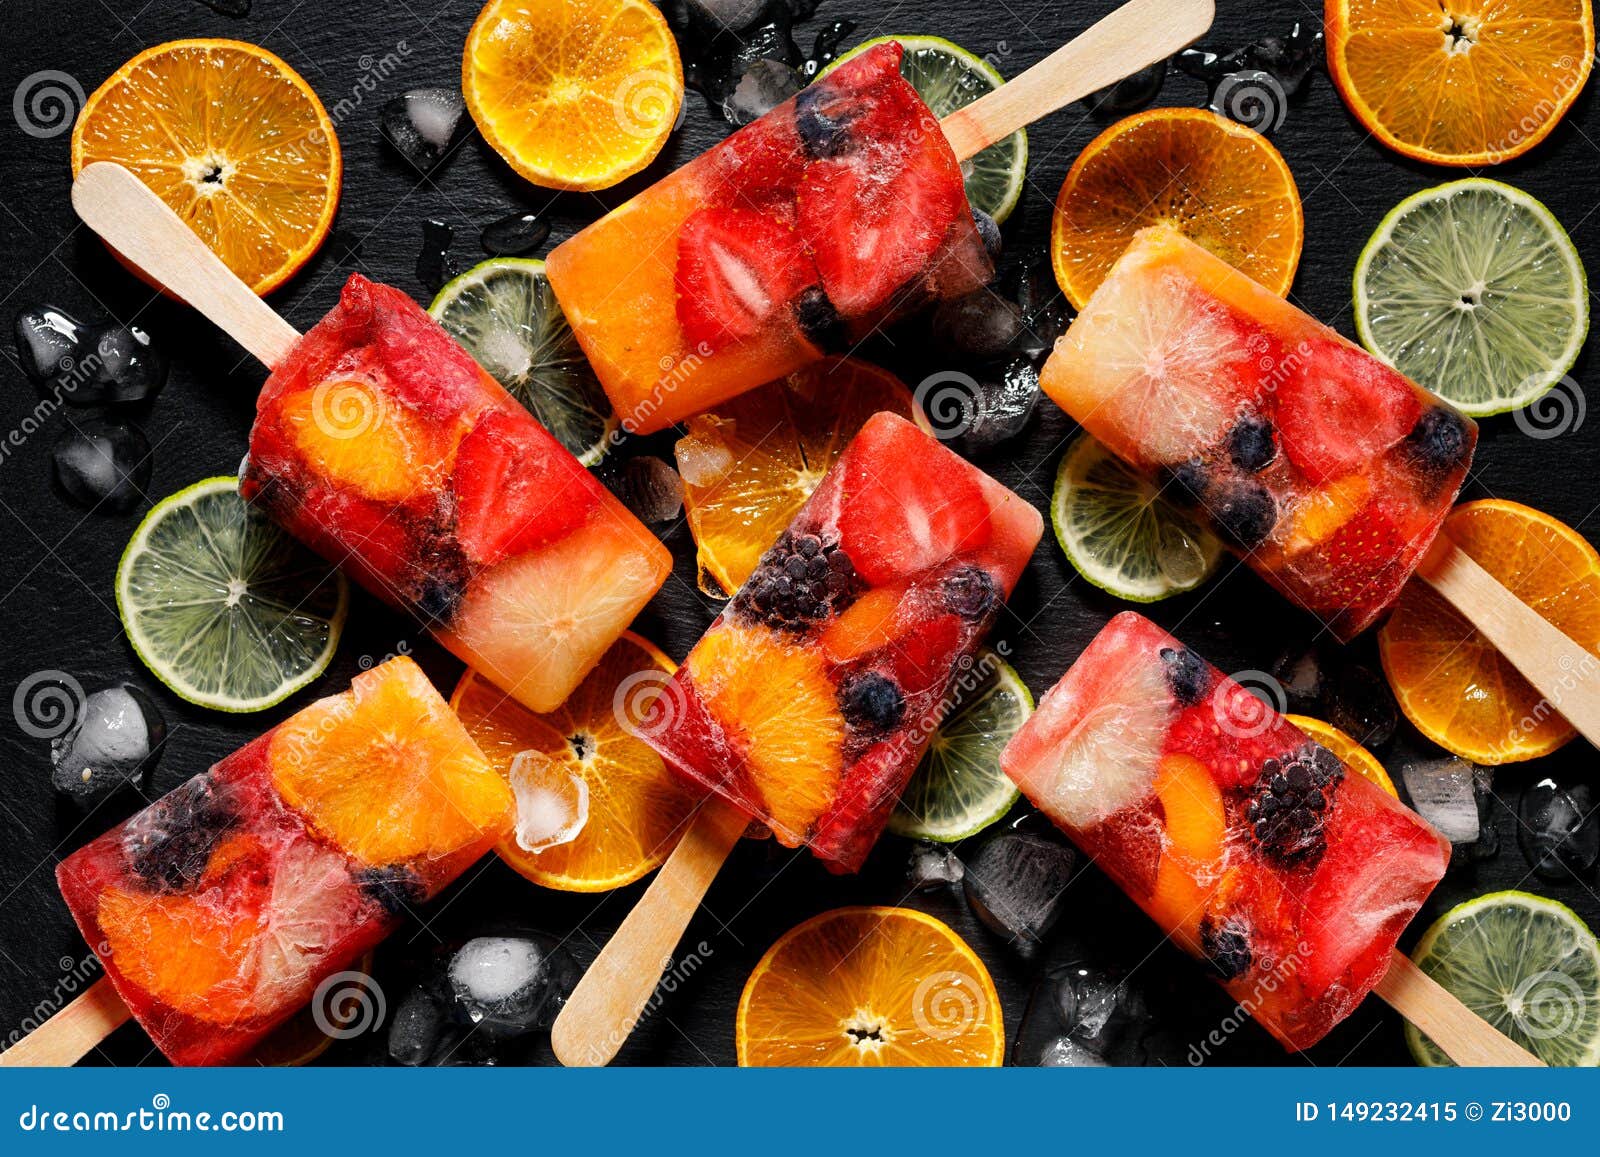 Fruit Popsicles Homemade Fruit Ice Lolly Of Various Fruits Top View